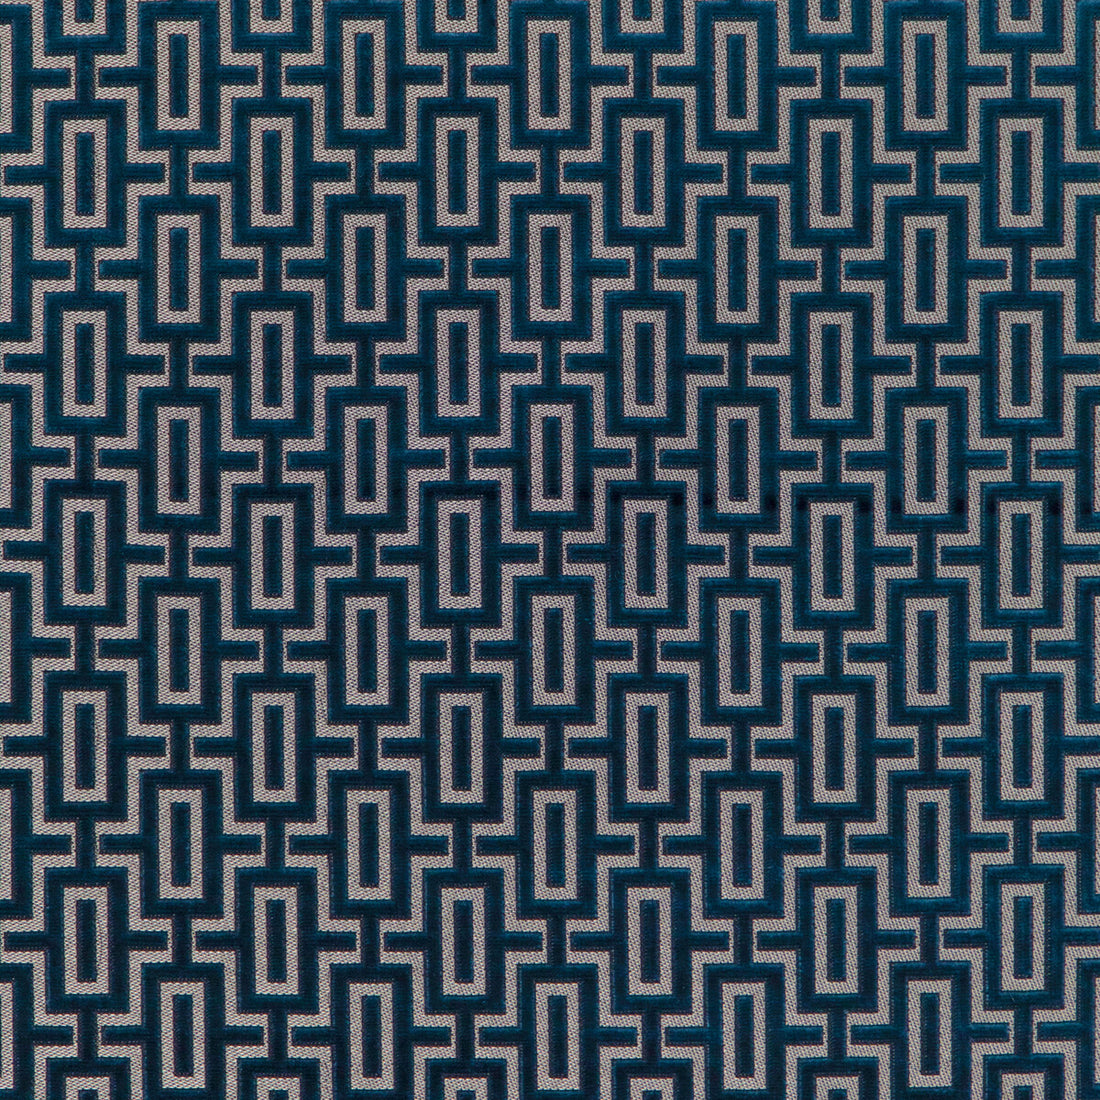 Joyride fabric in peacock color - pattern 37286.5.0 - by Kravet Contract in the Happy Hour collection